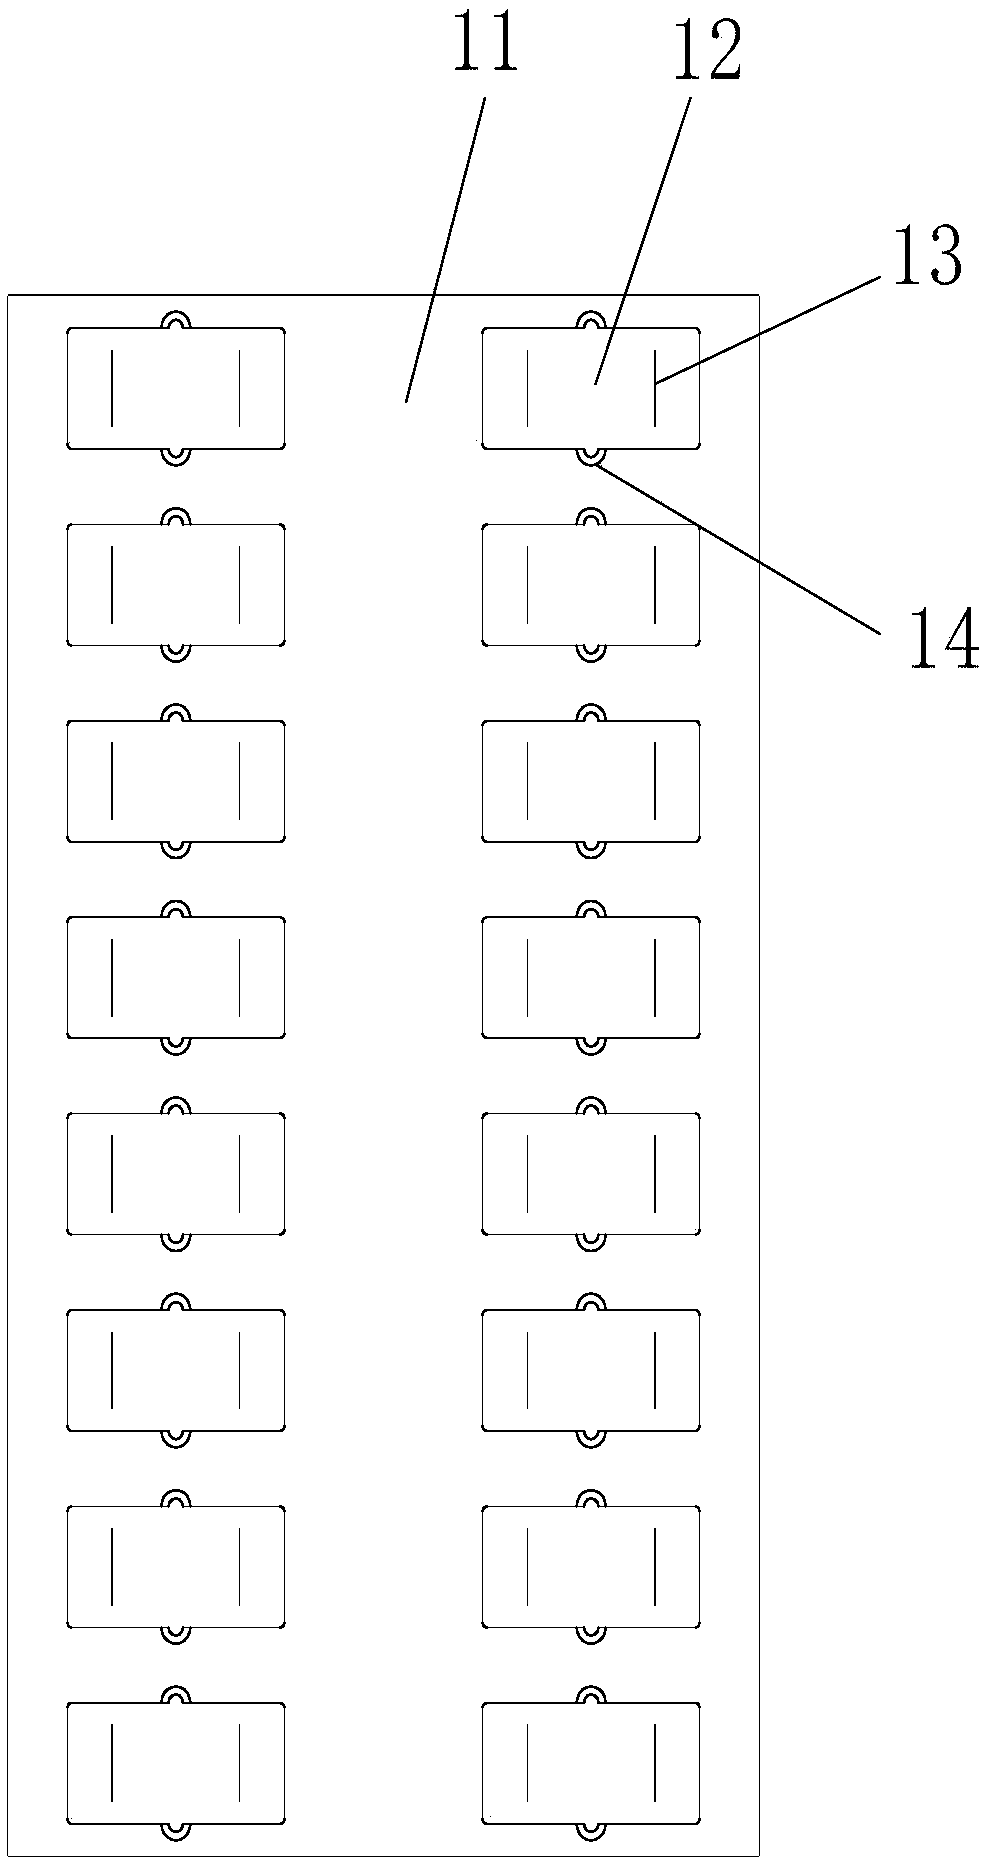 A multi-stage prefabricated track plate